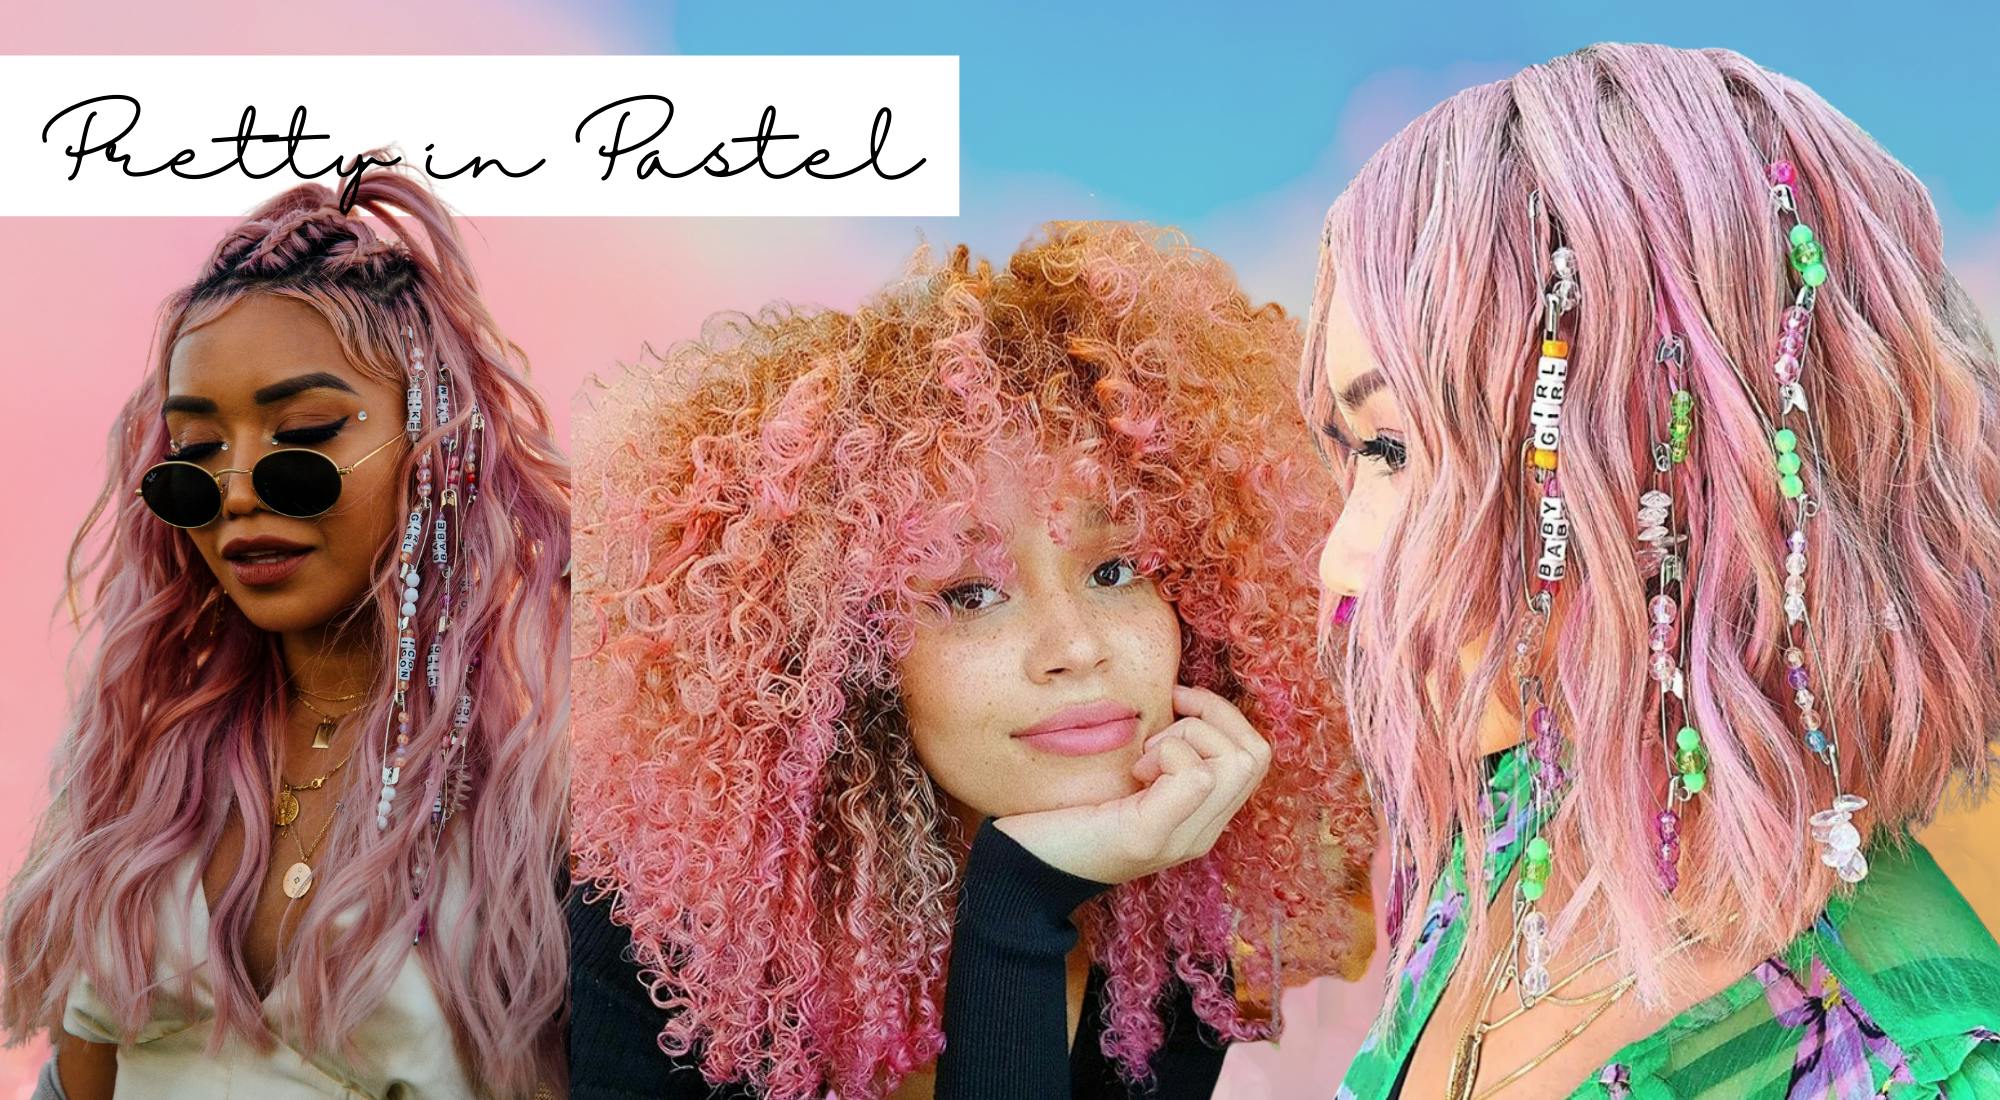 6 Simple Festival hairstyle ideas that are ideal for any festival | blow LTD